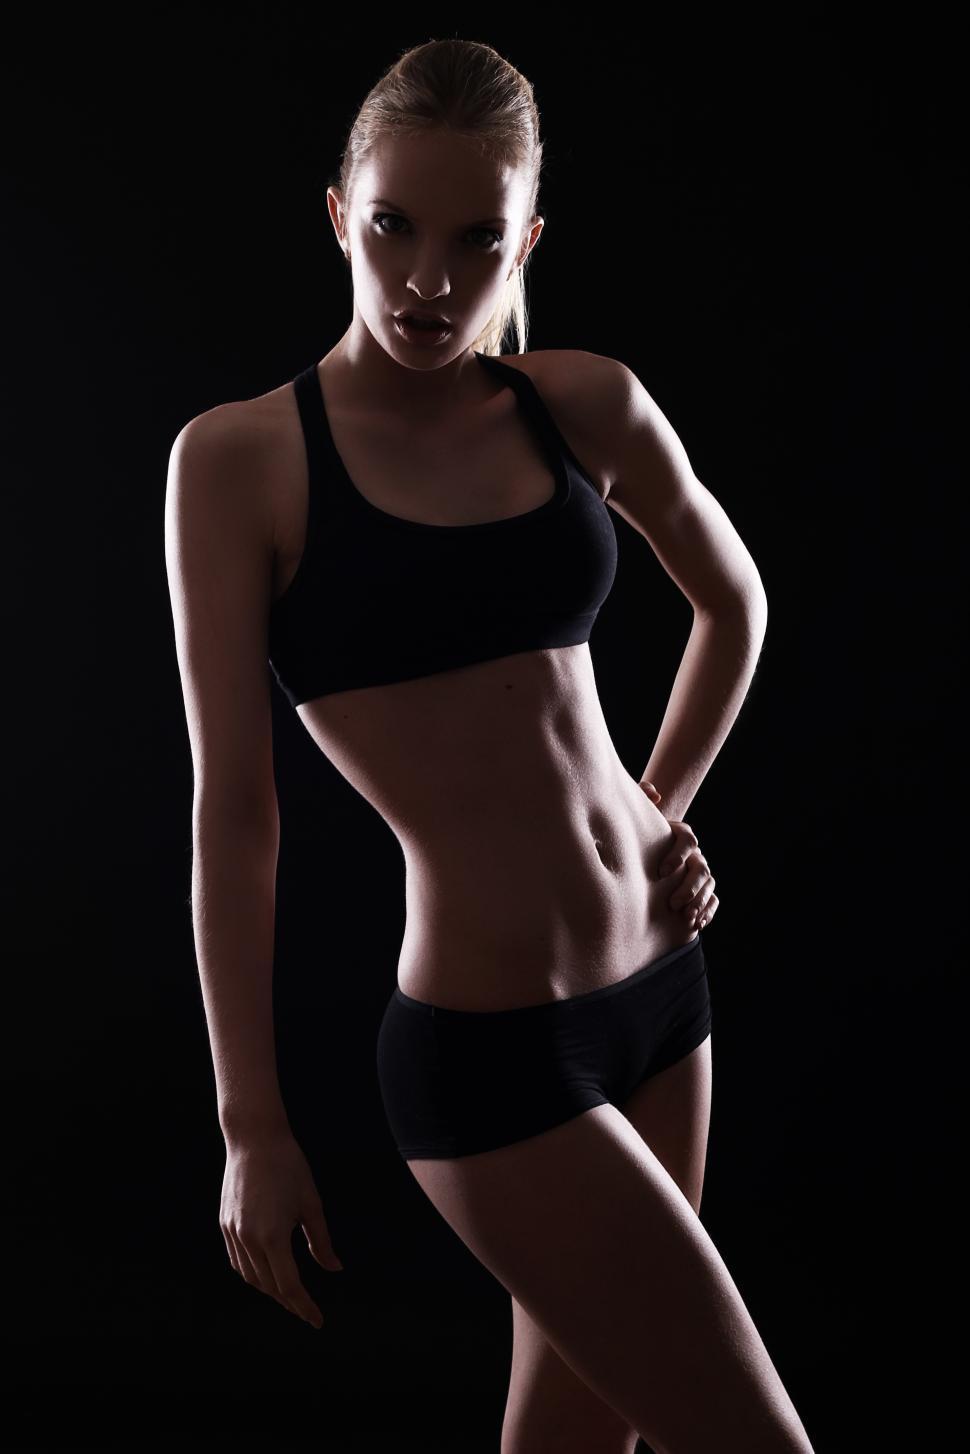 Free Image of Fit woman in dramatic light 